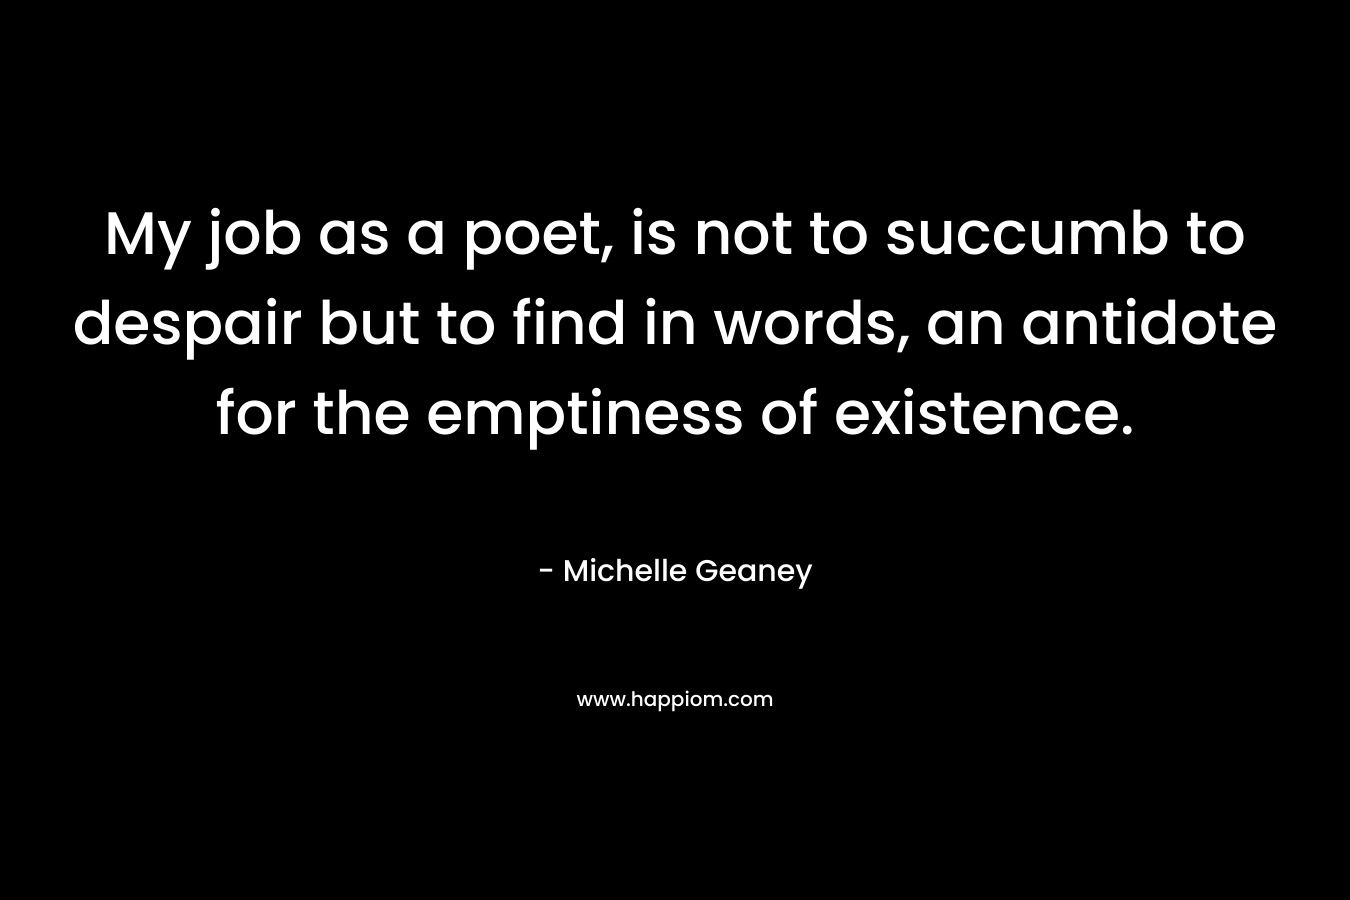 My job as a poet, is not to succumb to despair but to find in words, an antidote for the emptiness of existence. – Michelle Geaney